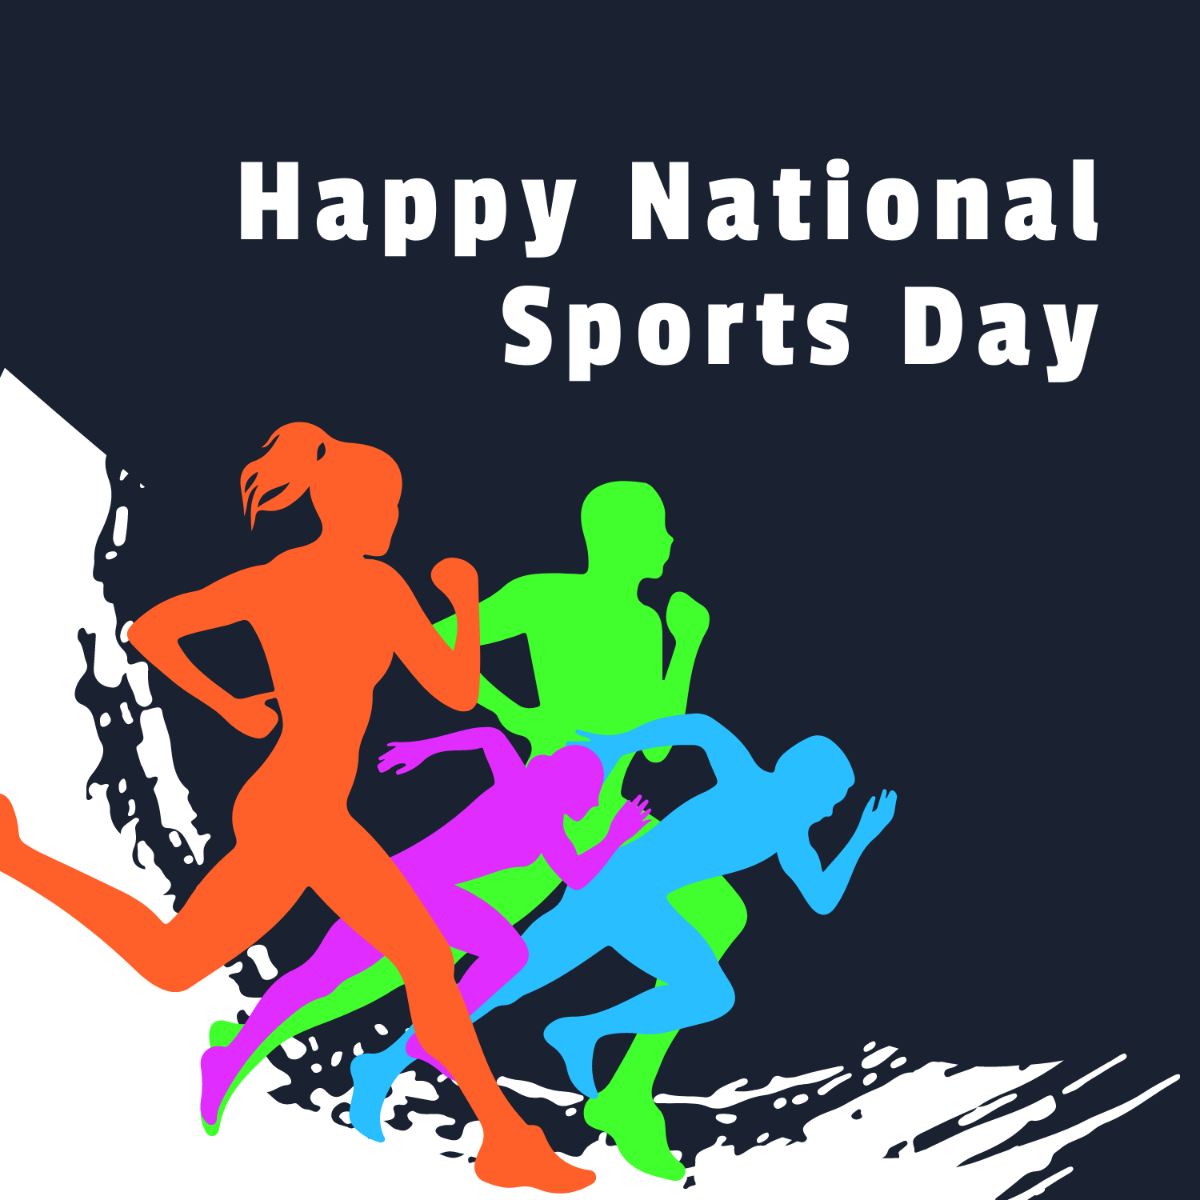 Happy National Sports Day Illustration Template